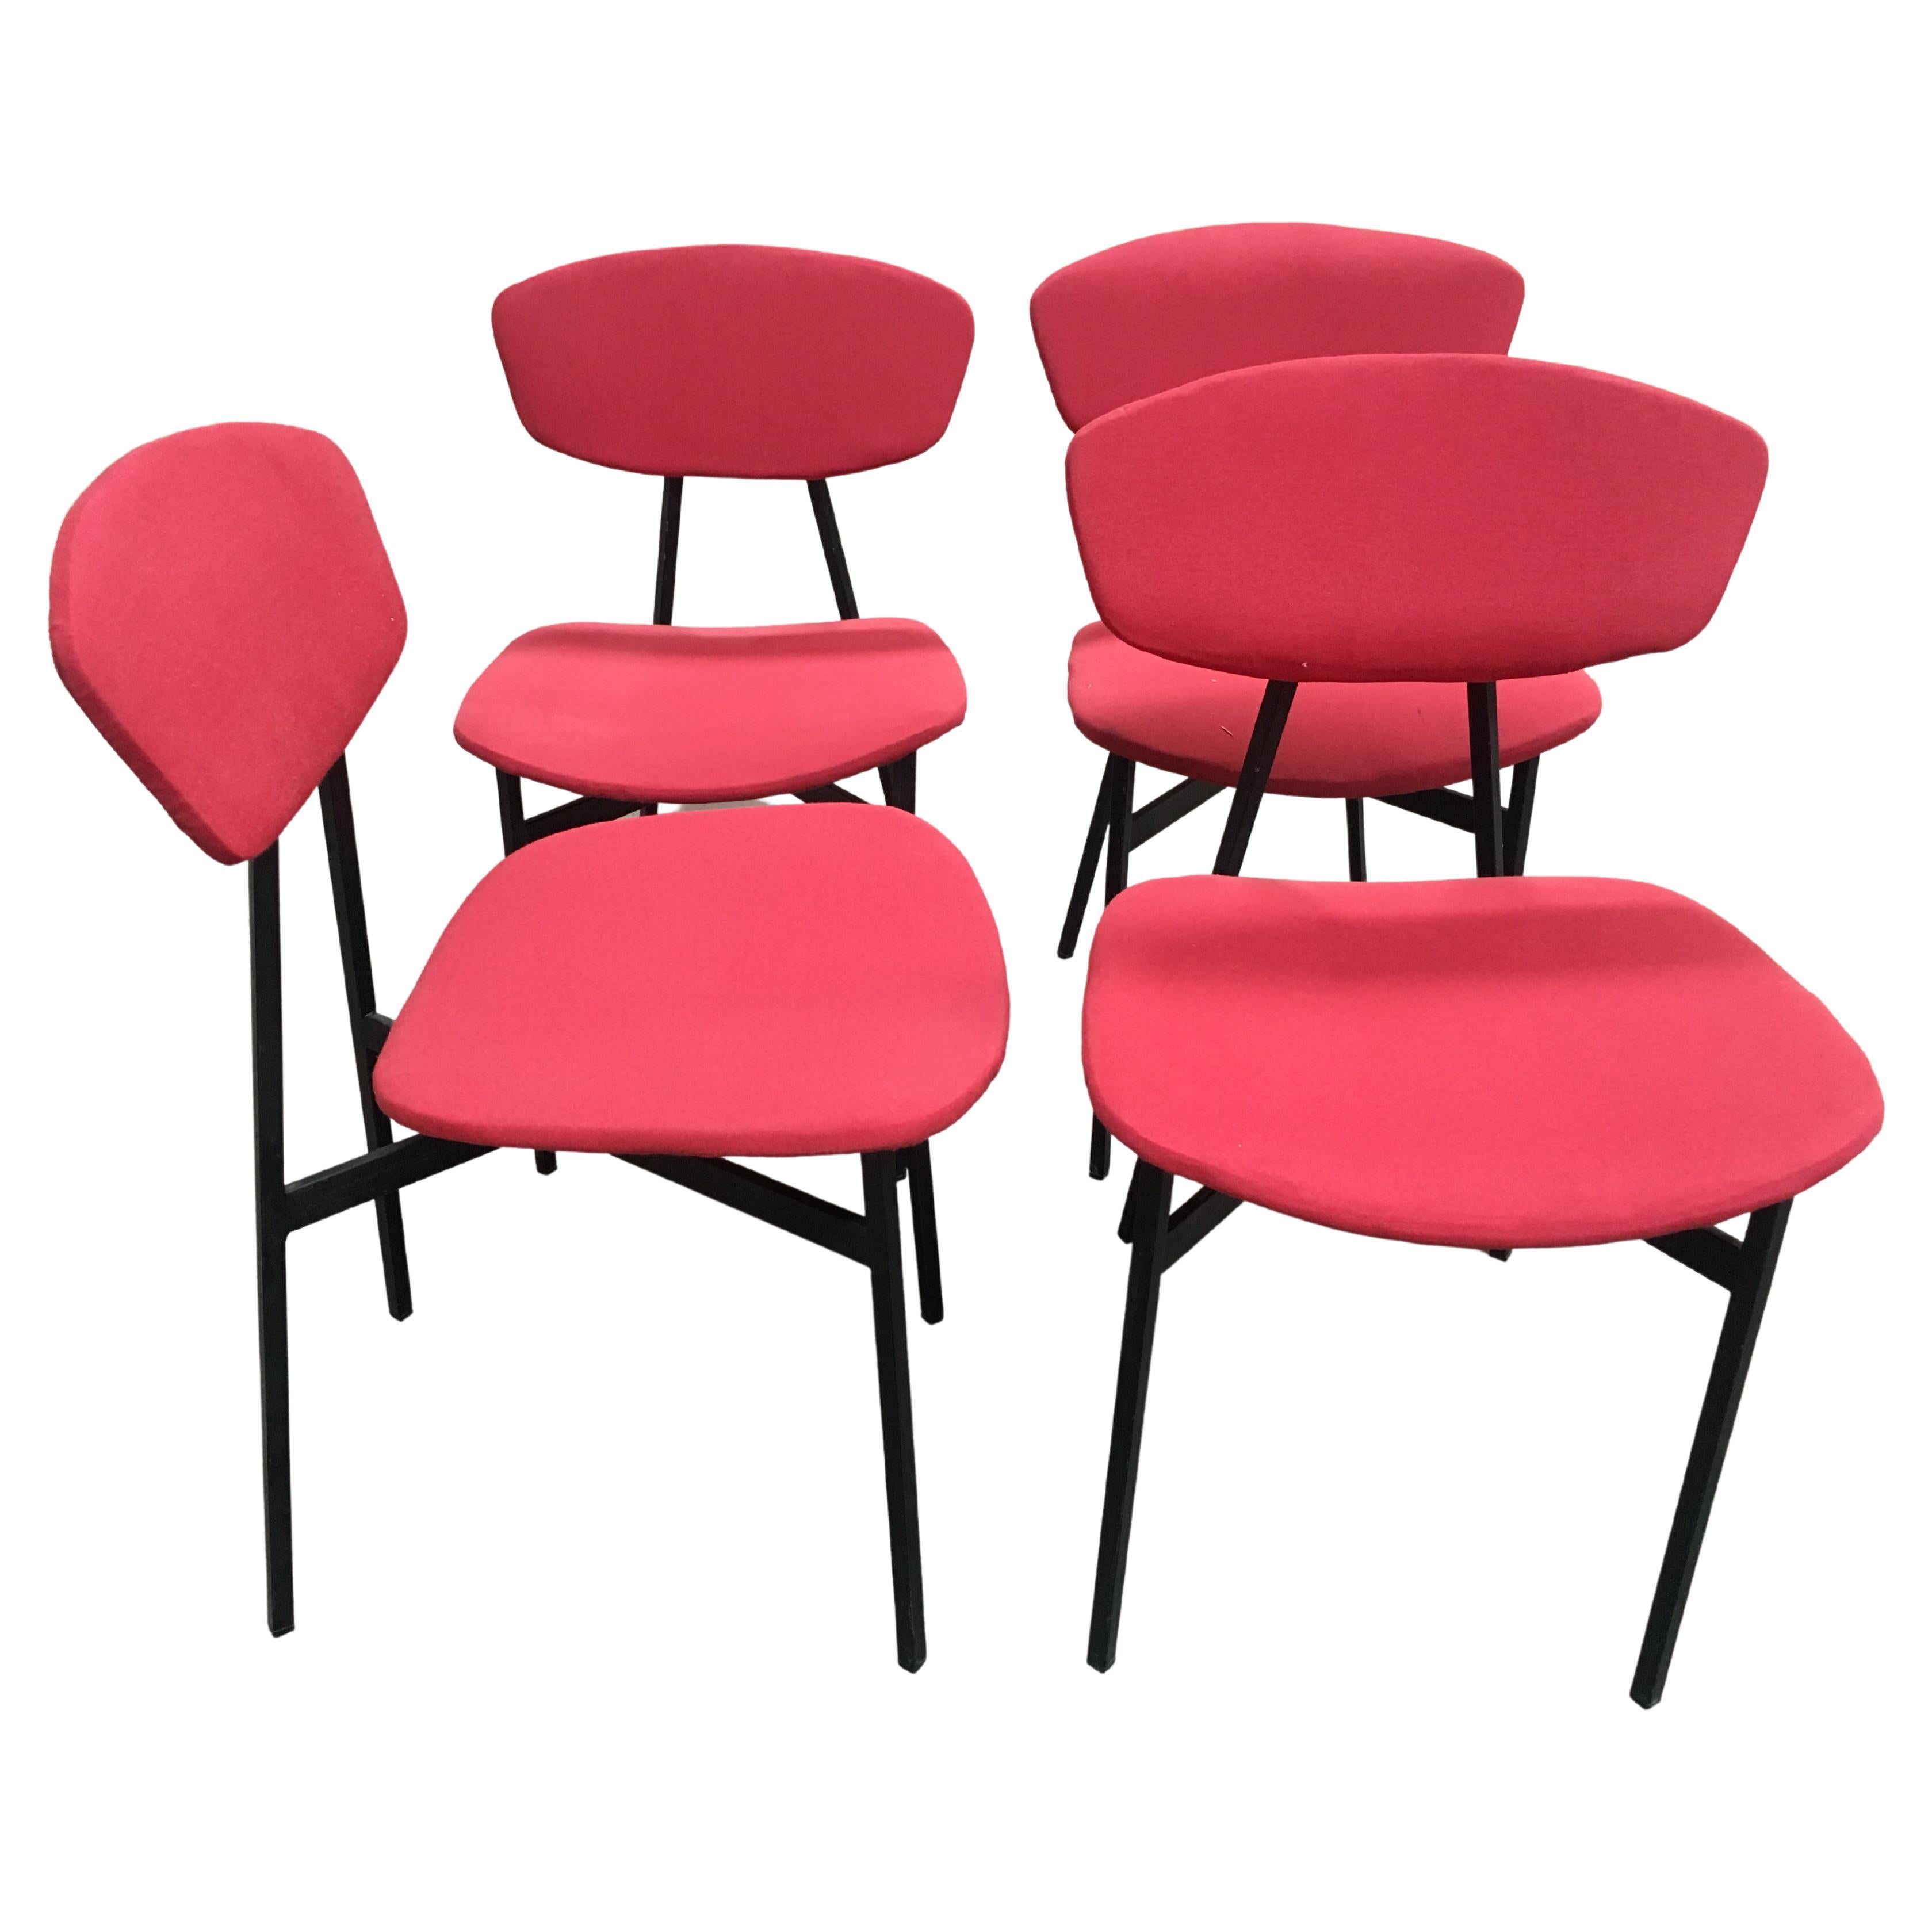 Mid-Century Modern Italian Set of Four Dining Upholstered Chairs, 1960s For Sale